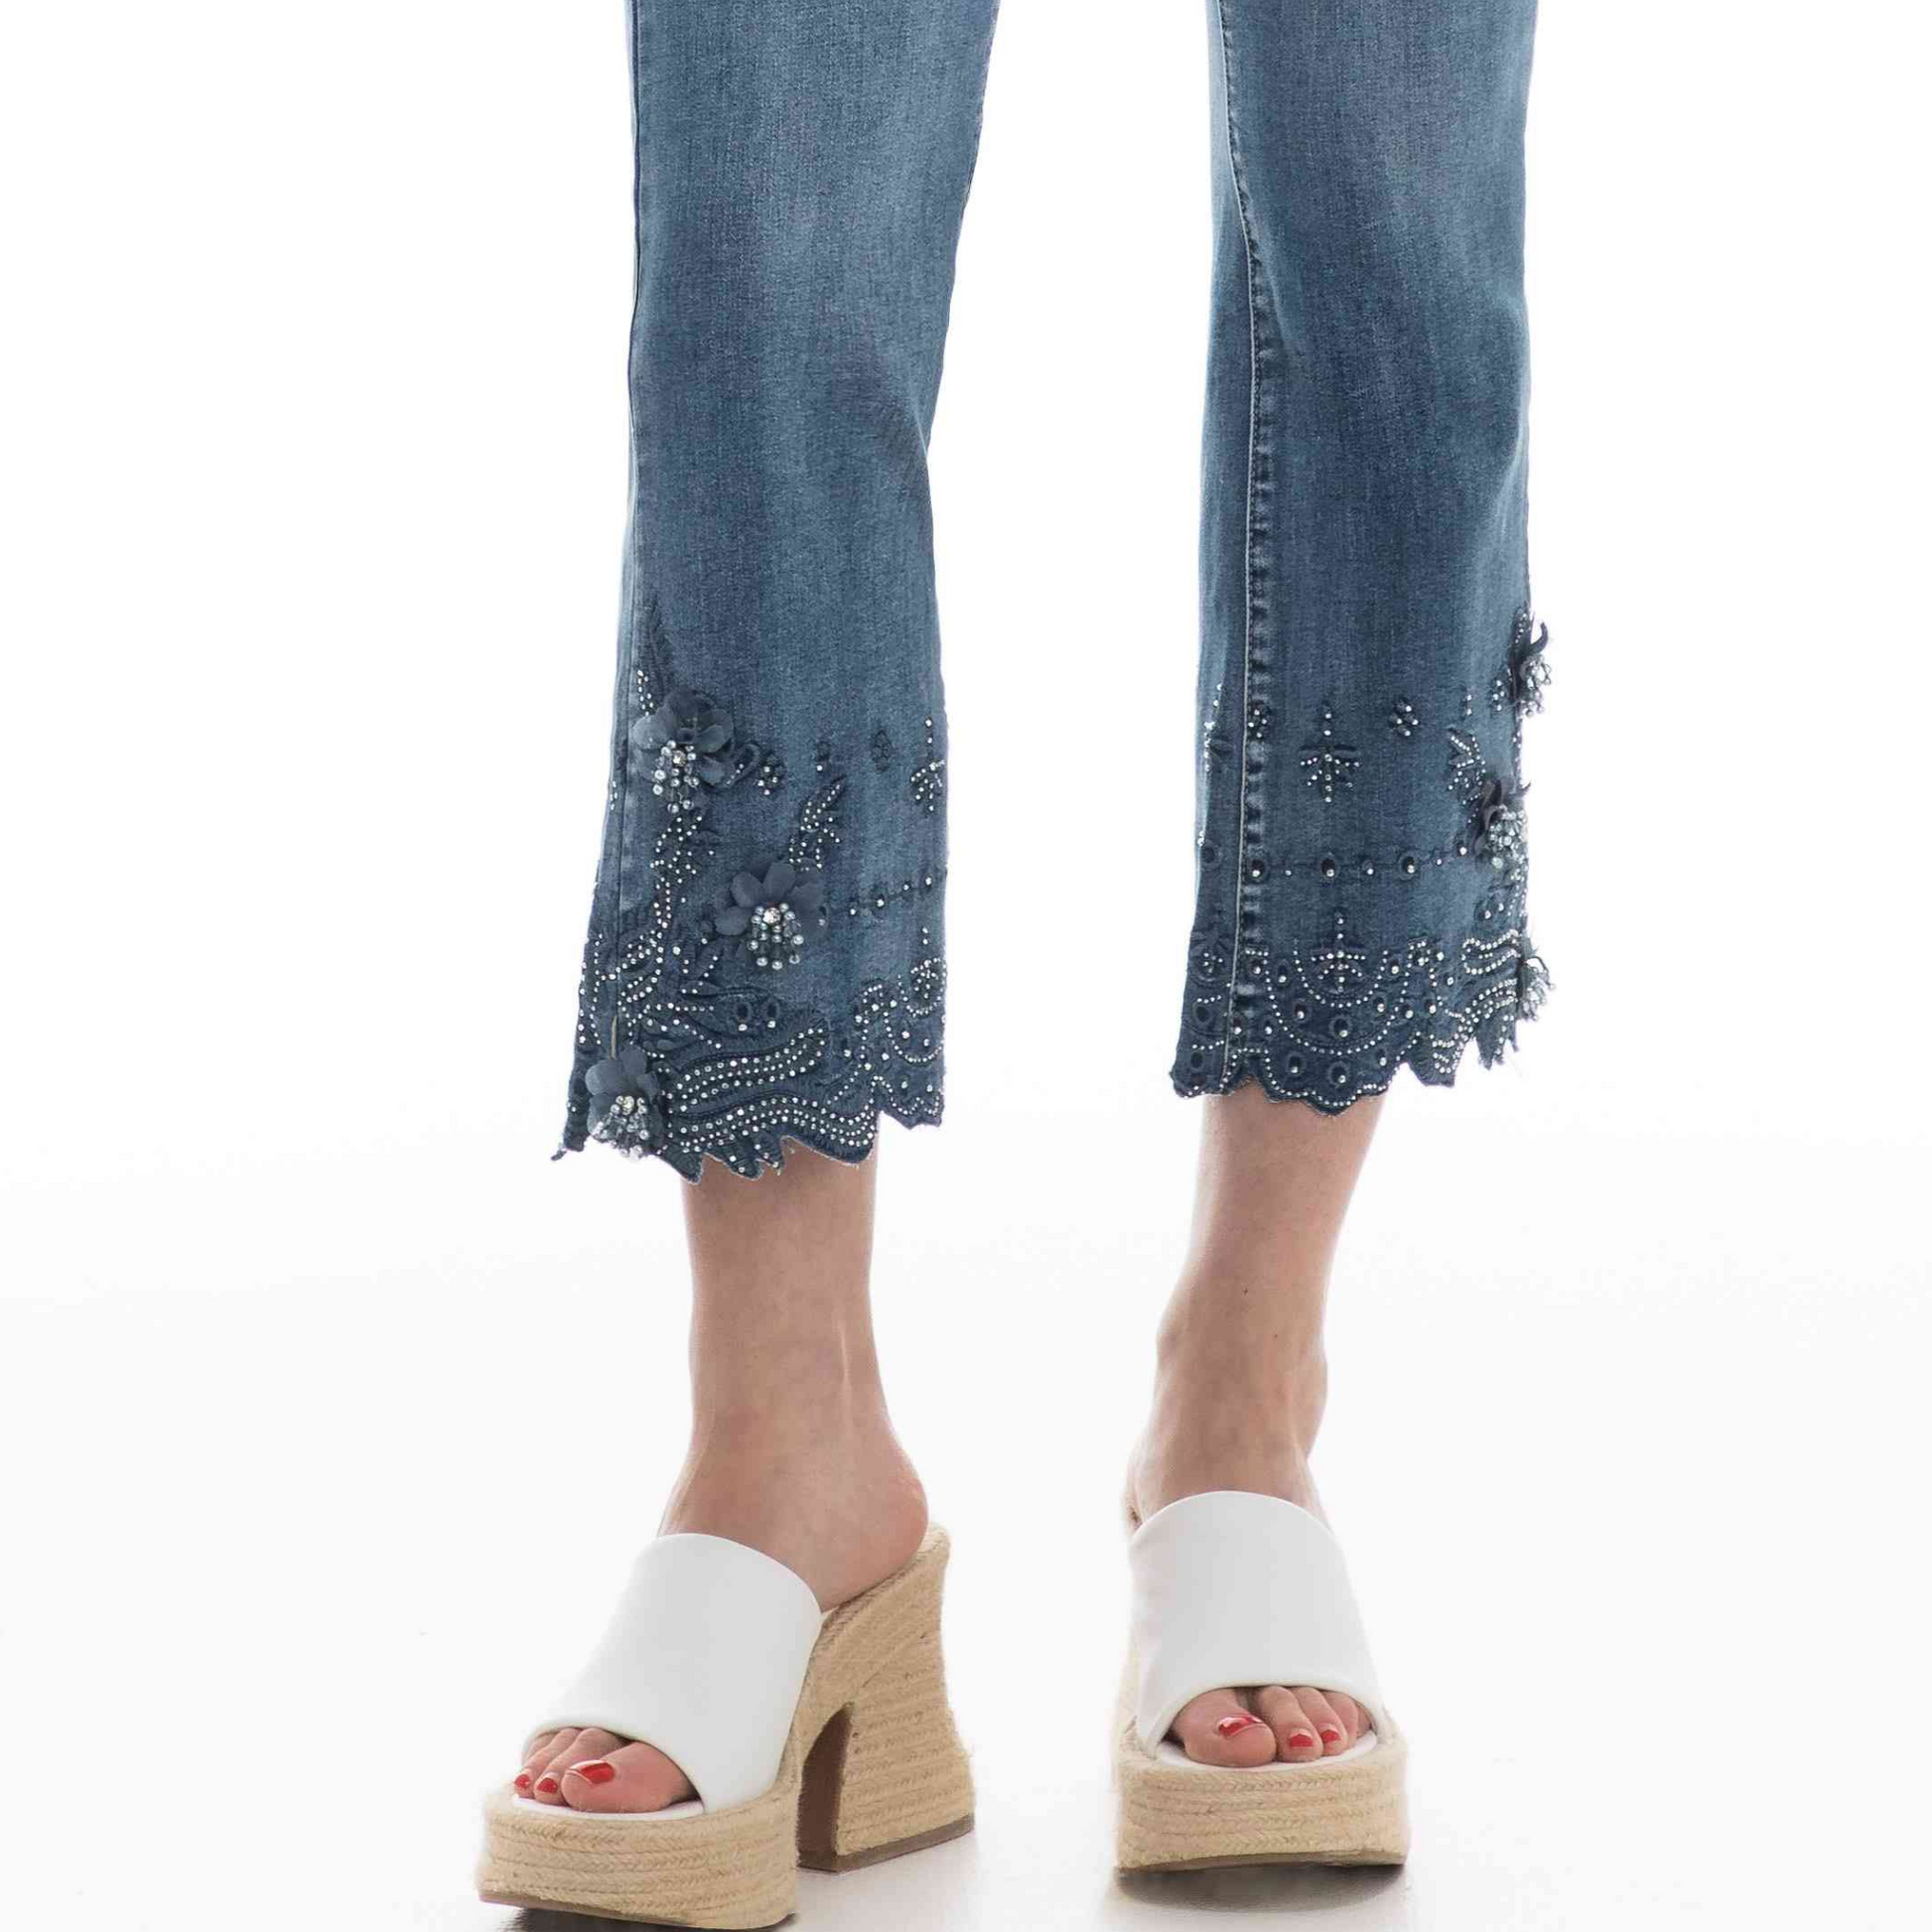 Woman wearing Orly's Flower Detailed Hem Jeans with floral detailing and white platform sandals.